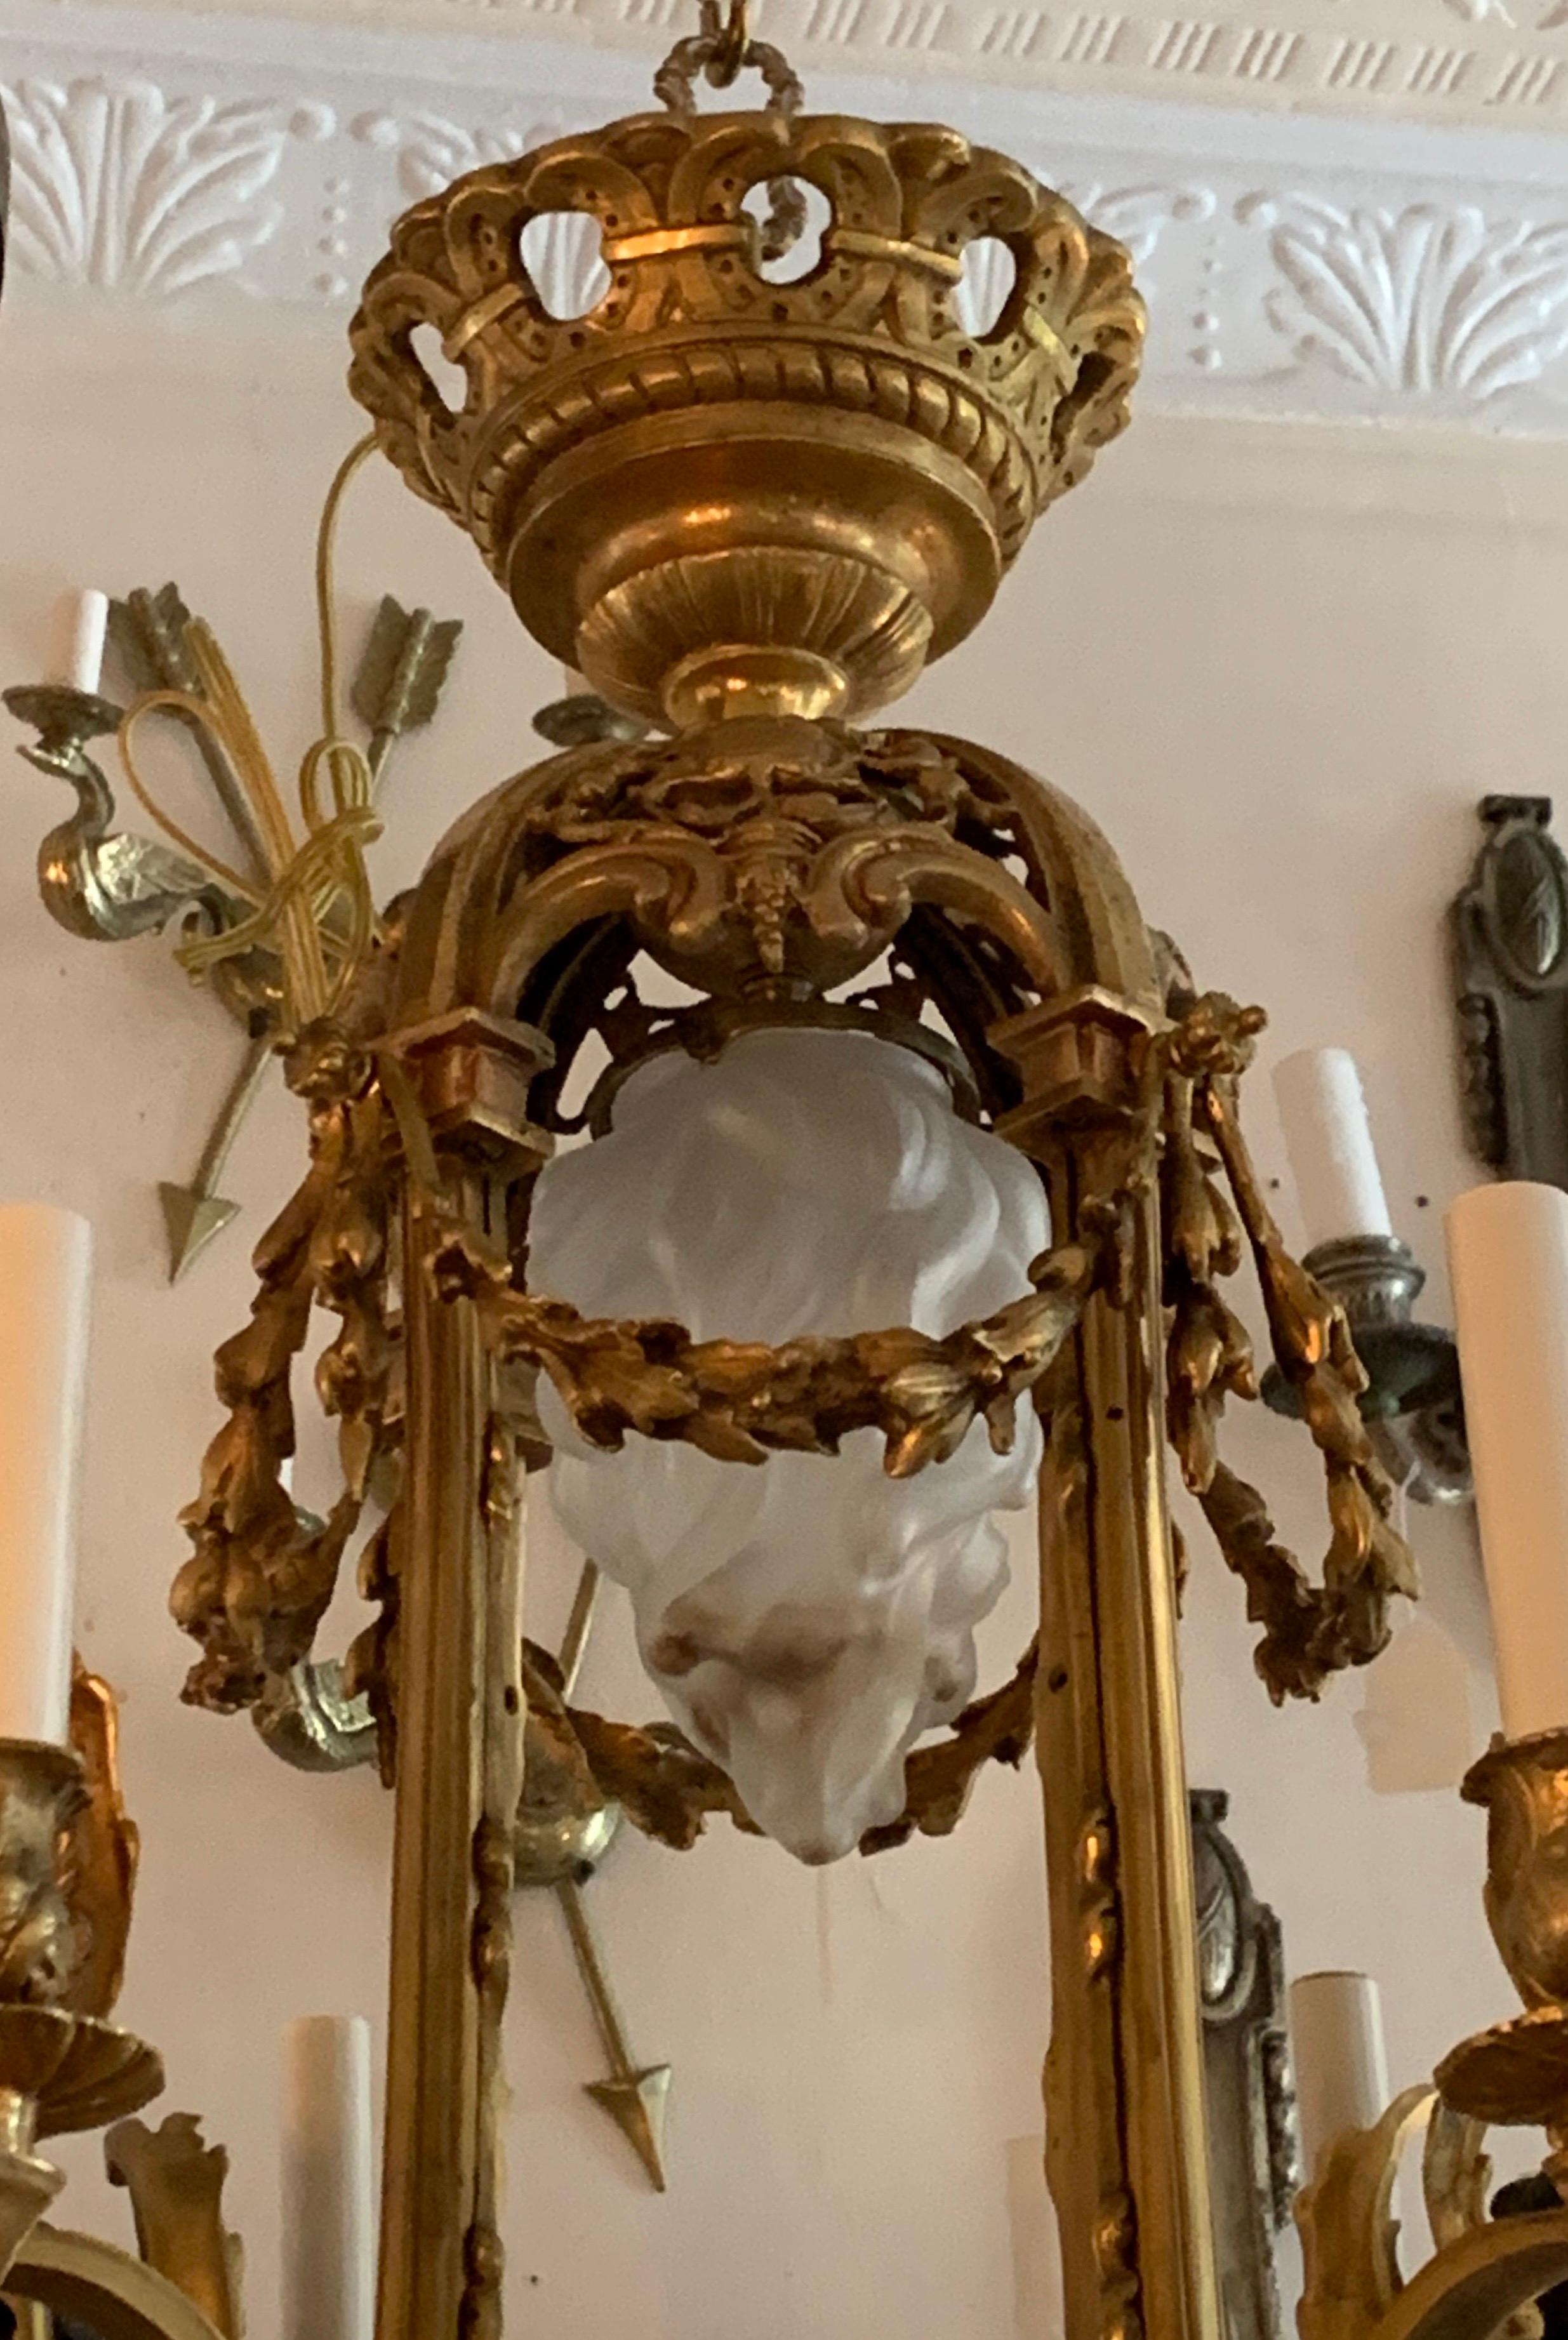 A wonderful French cherub / putti neoclassical doré & patinated bronze nine-light chandelier with 4 cherubs each having two candelabra lights and a center flame frosted glass shade.